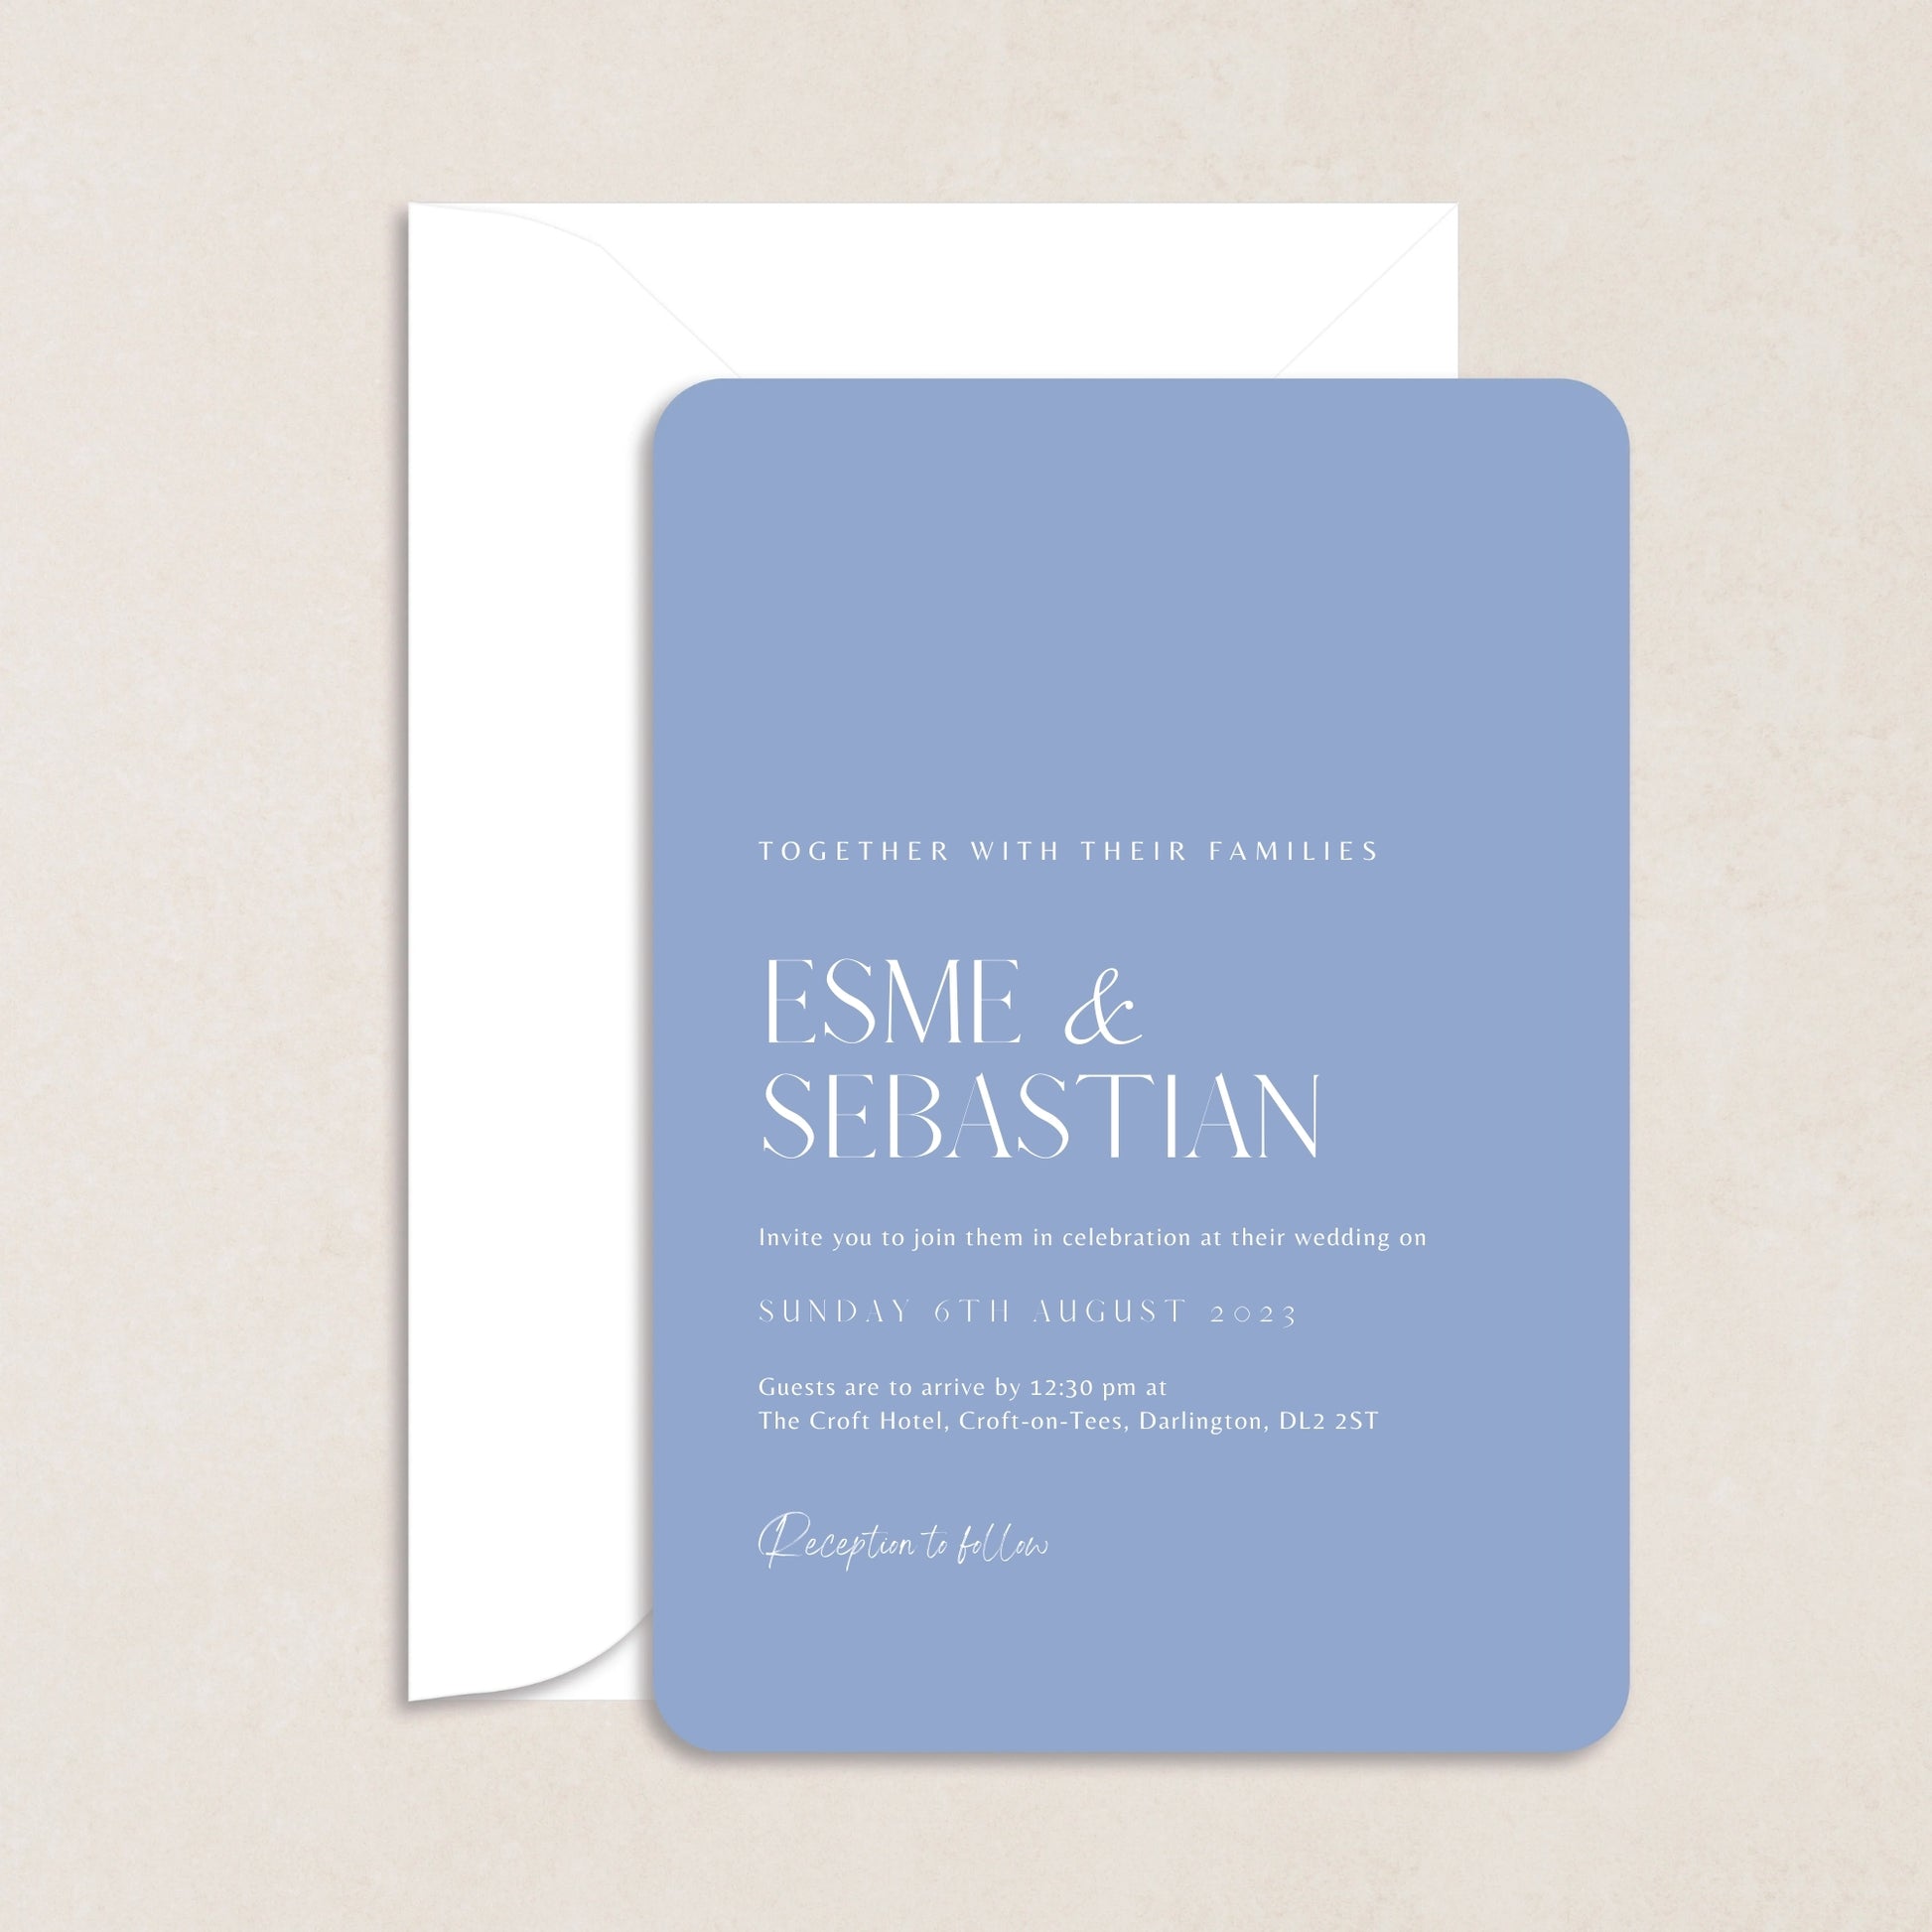 ESME Wedding Invitations - Wedding Invitations available at The Ivy Collection | Luxury Wedding Stationery